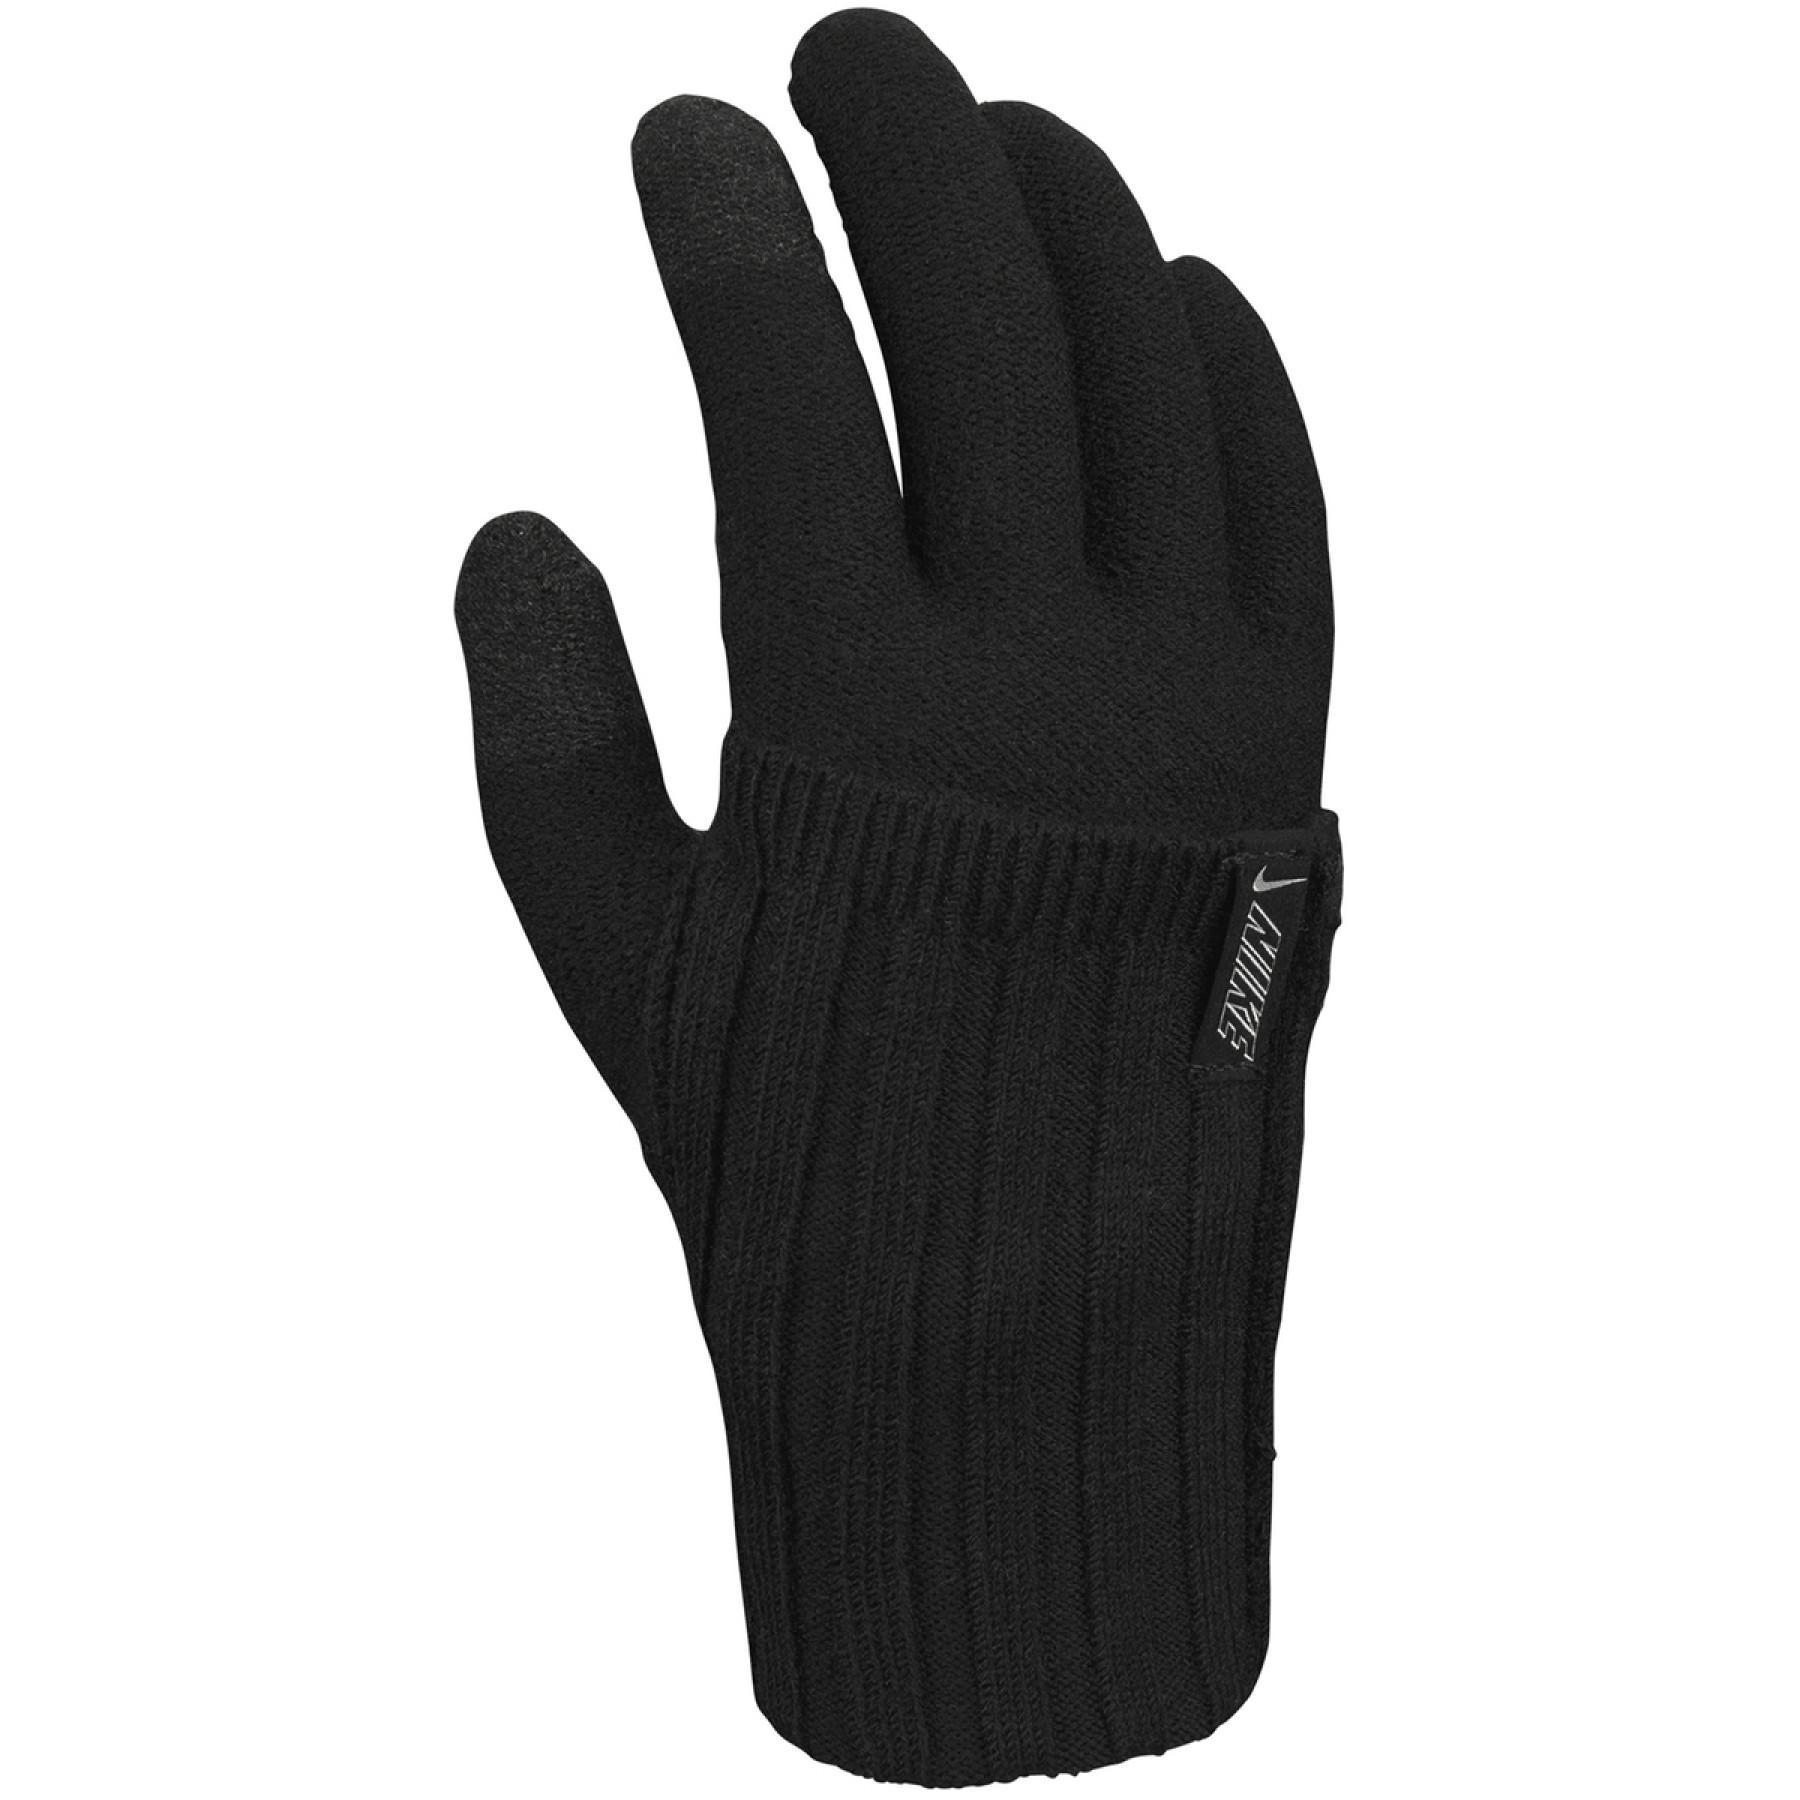 Women's gloves Nike cold weather knit